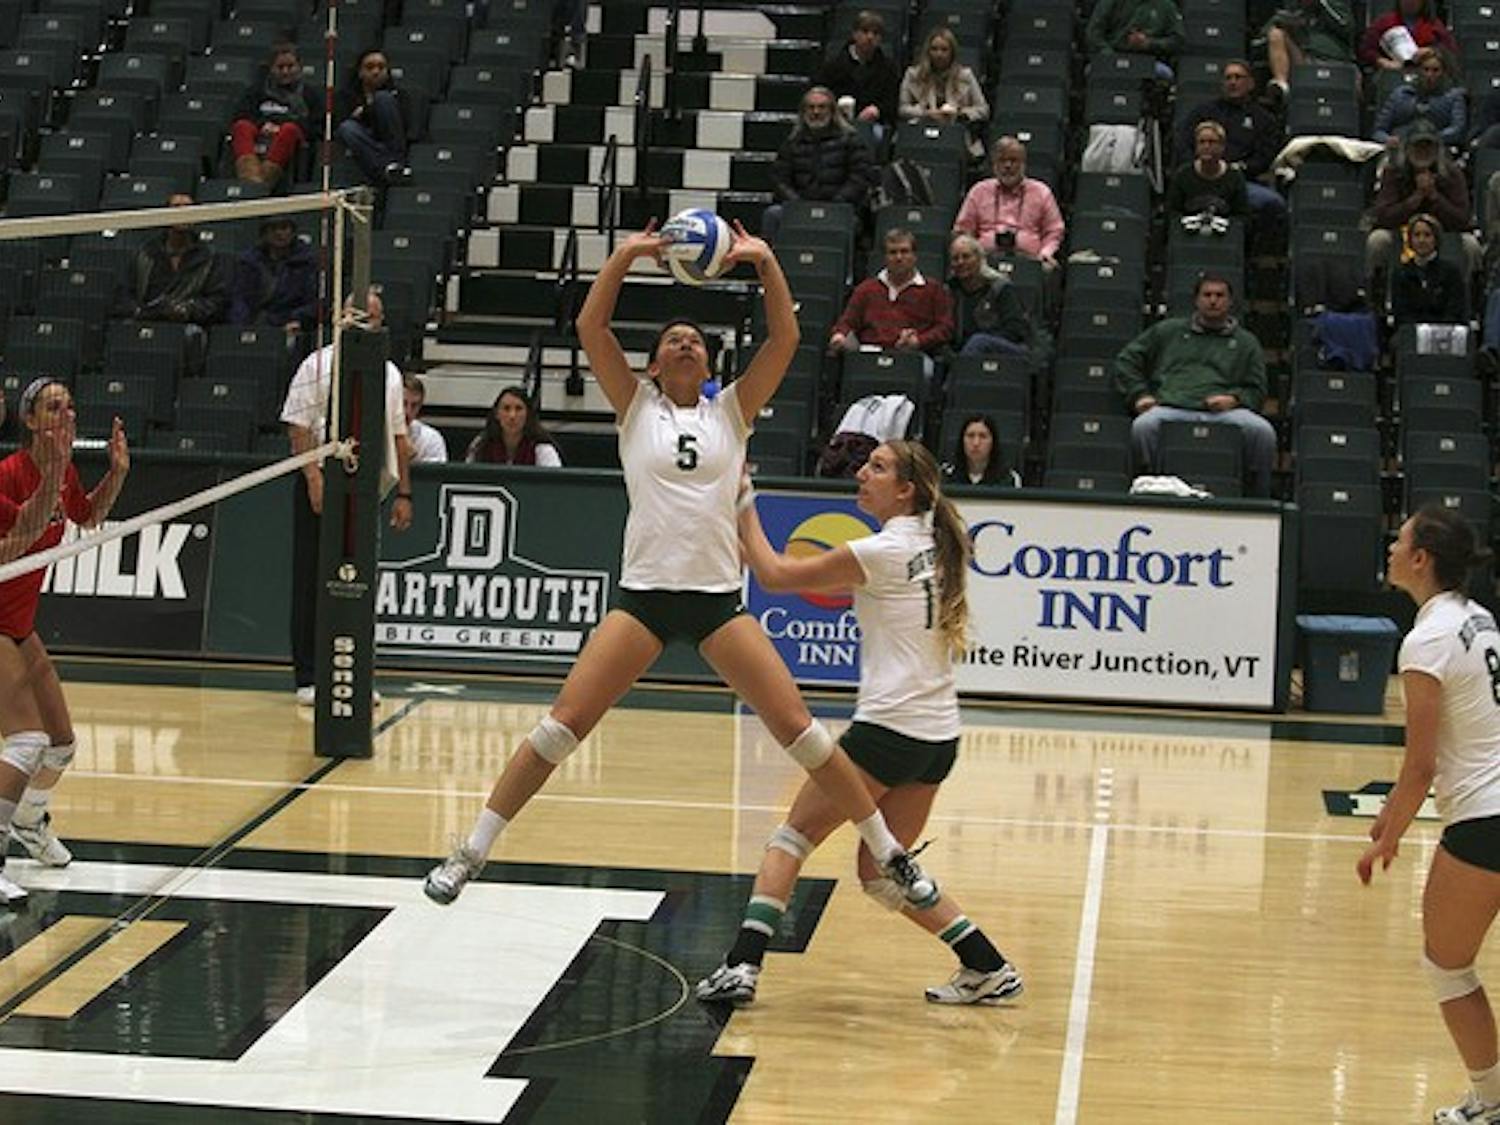 The Dartmouth volleyball team came back from a two-set-to-one deficit to defeat Harvard University in five games on Friday.